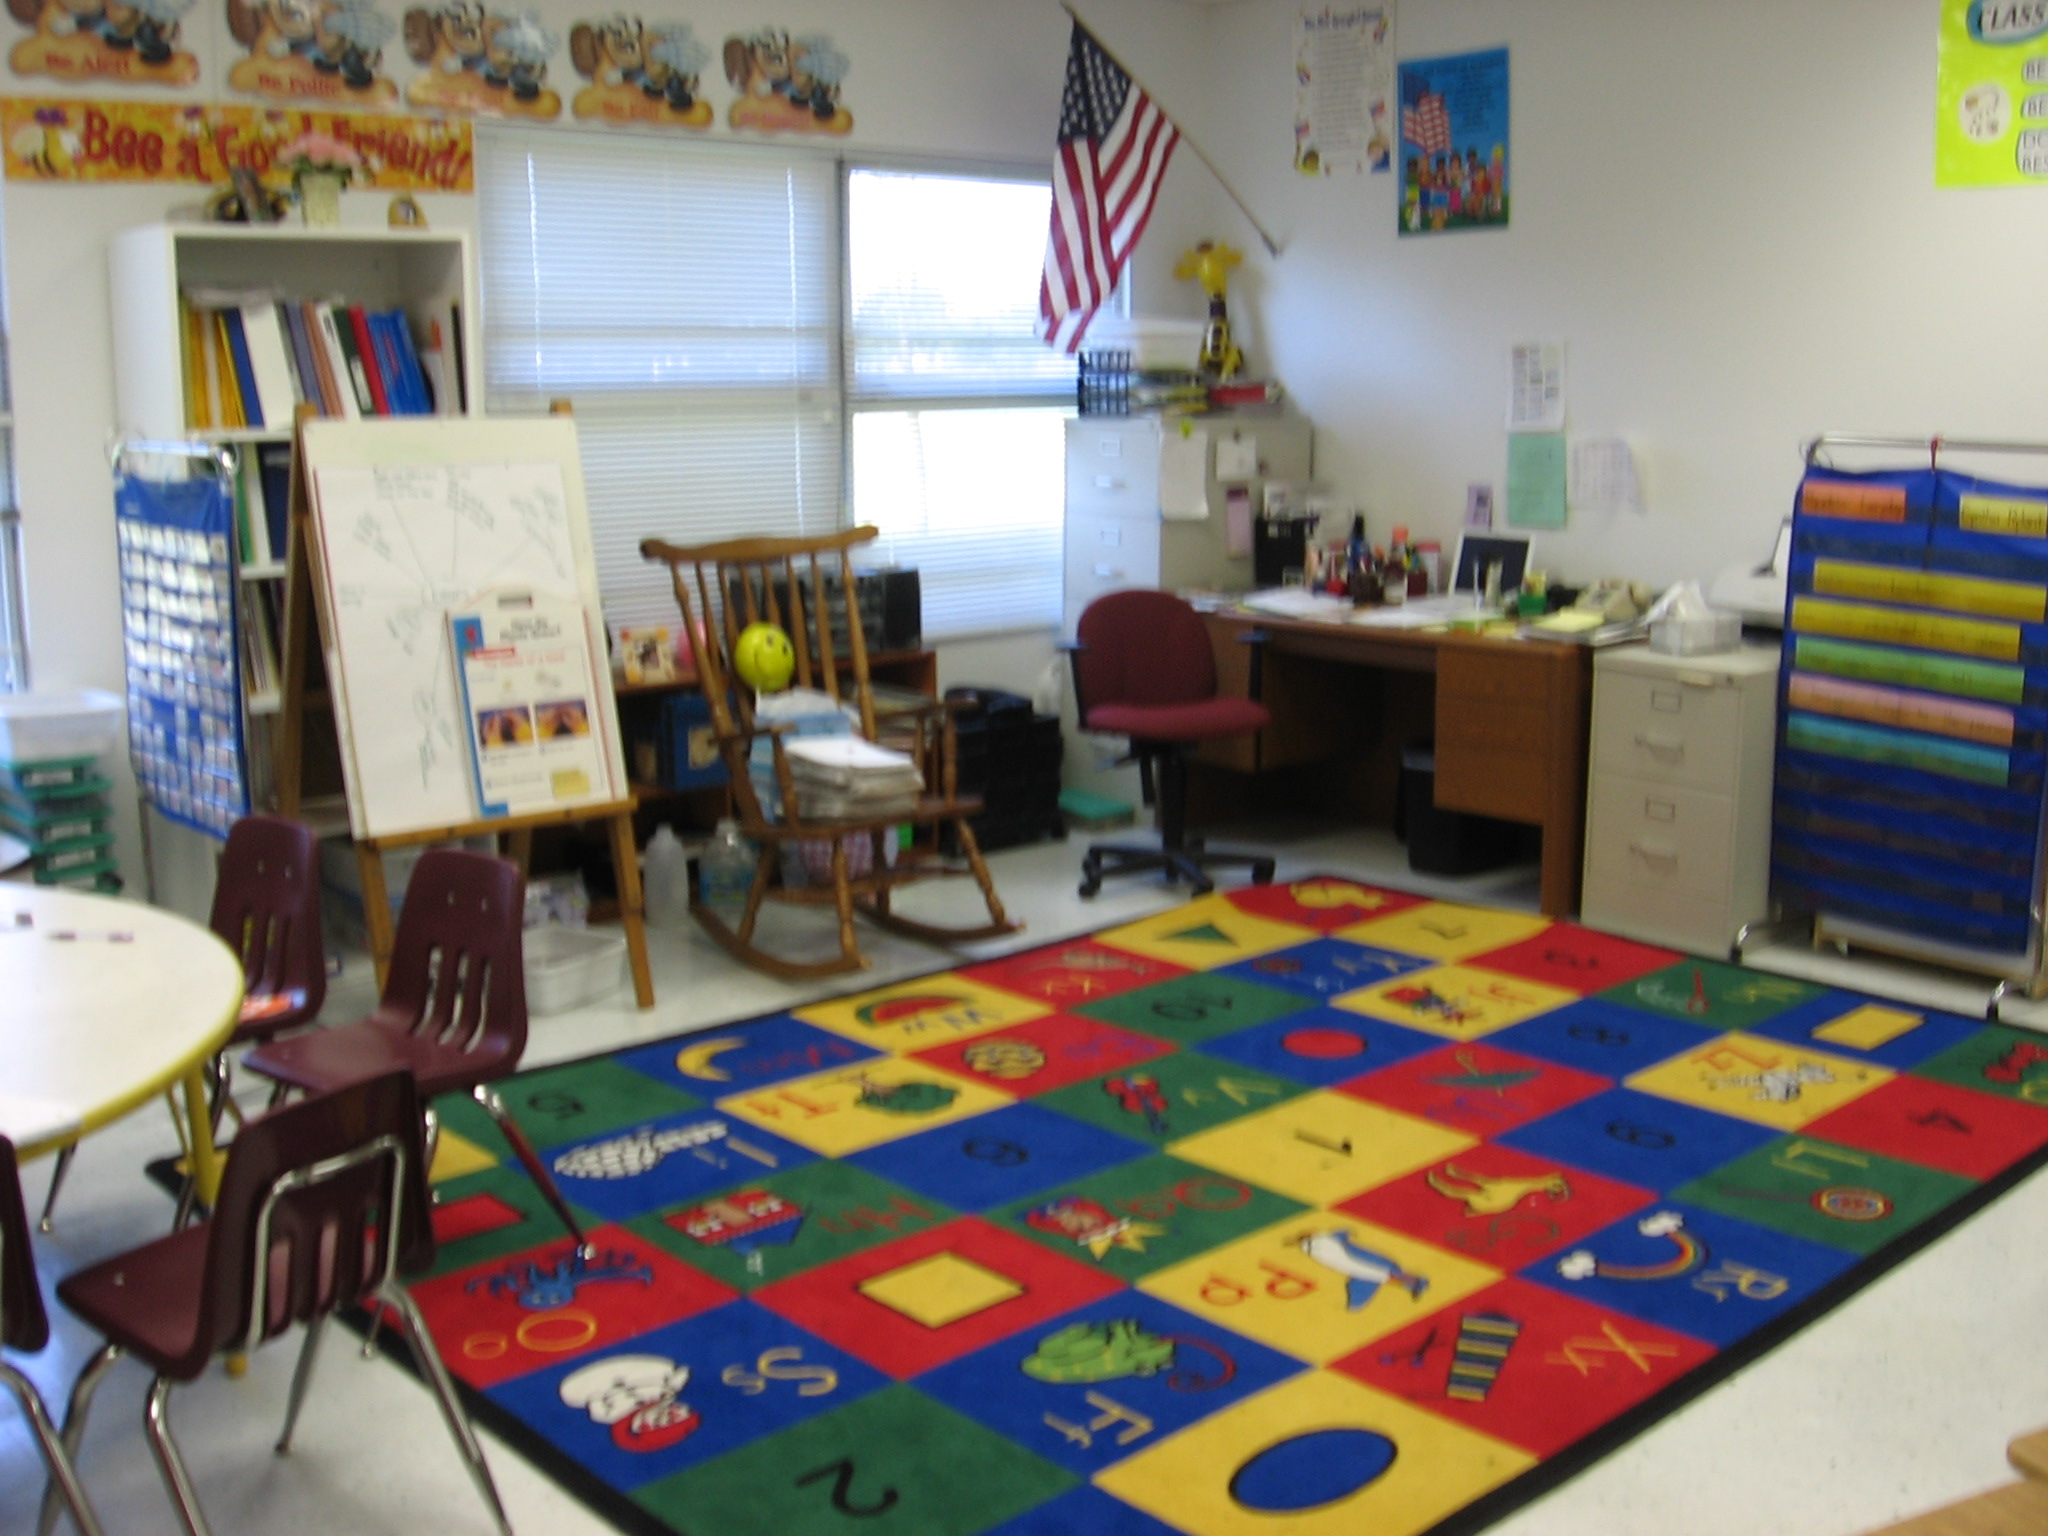 1st Grade. I also like the idea of having the gathering place so close to the teacher’s desk–very convenient.